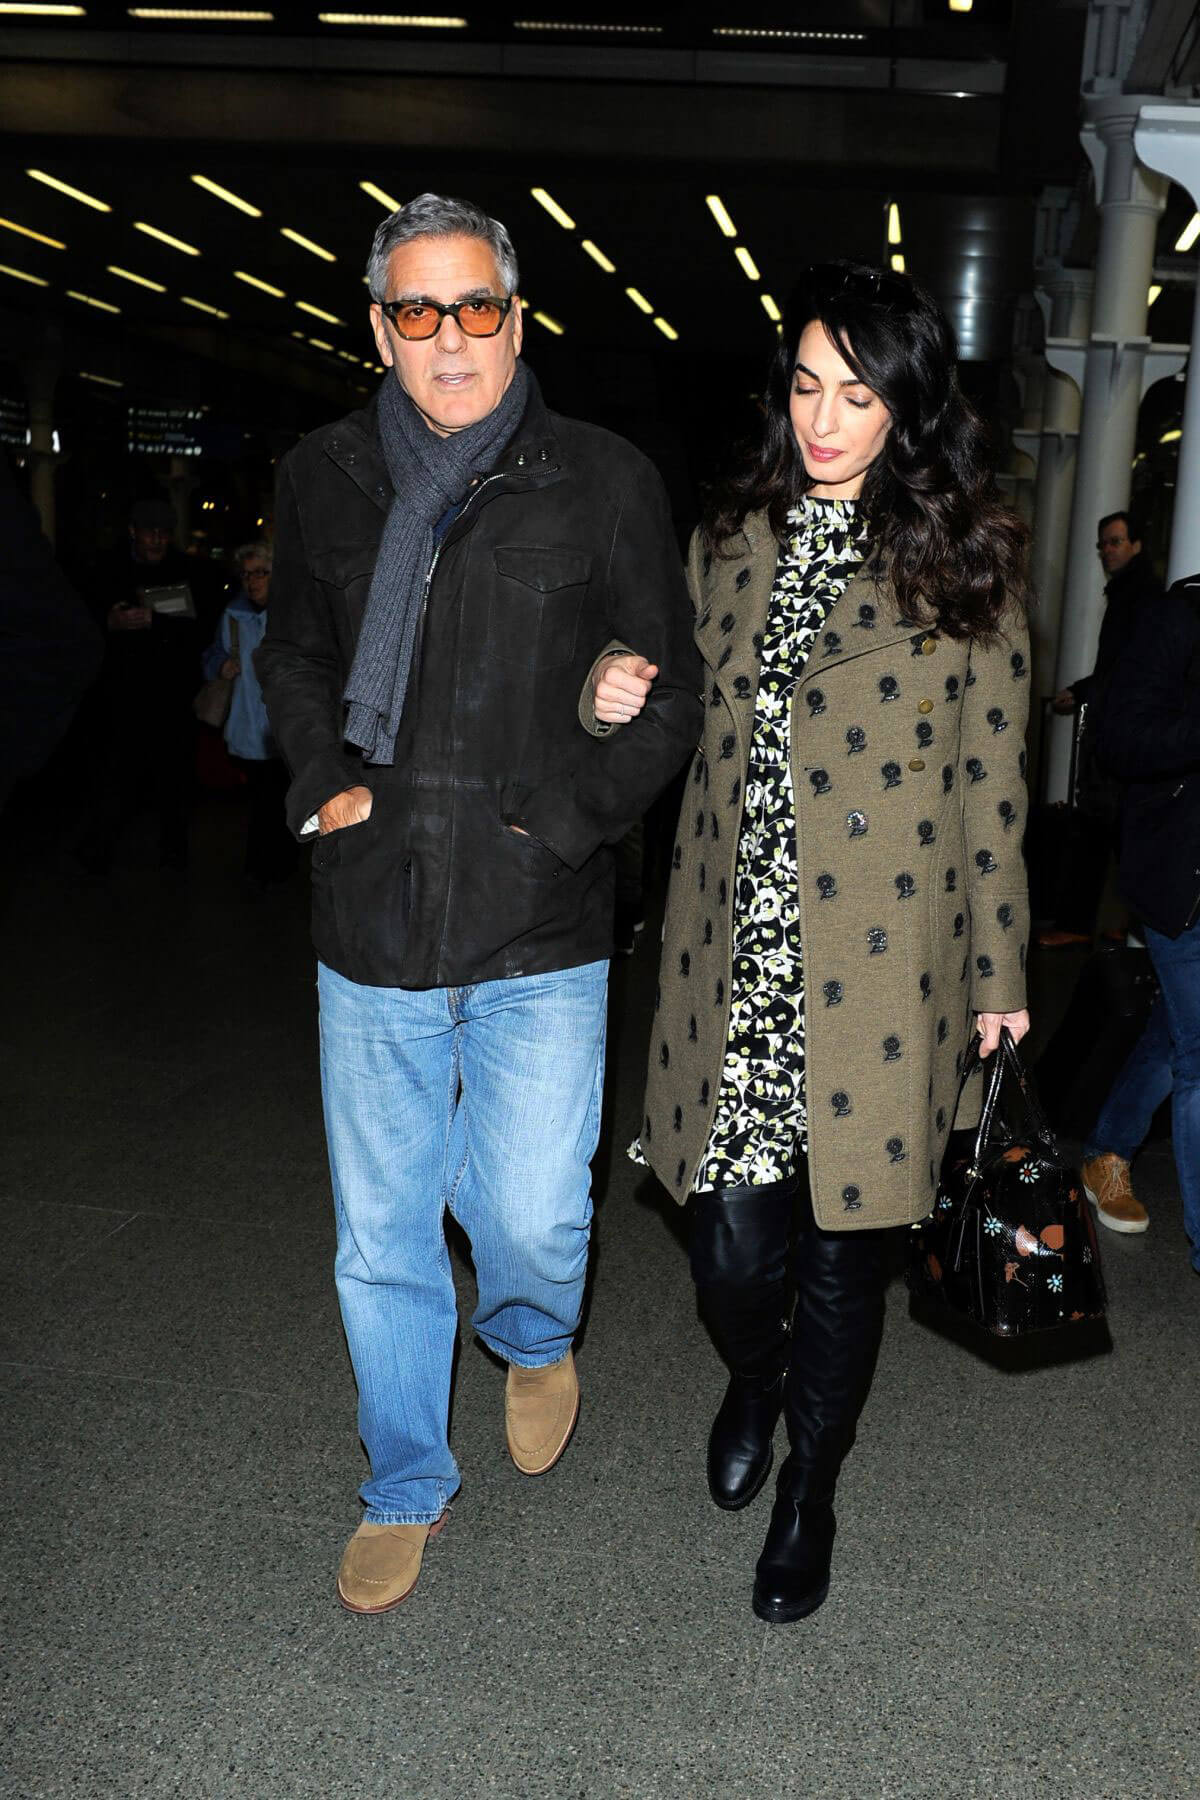 Amal Clooney and George Clooney at St Pancras Eurostar in London 7